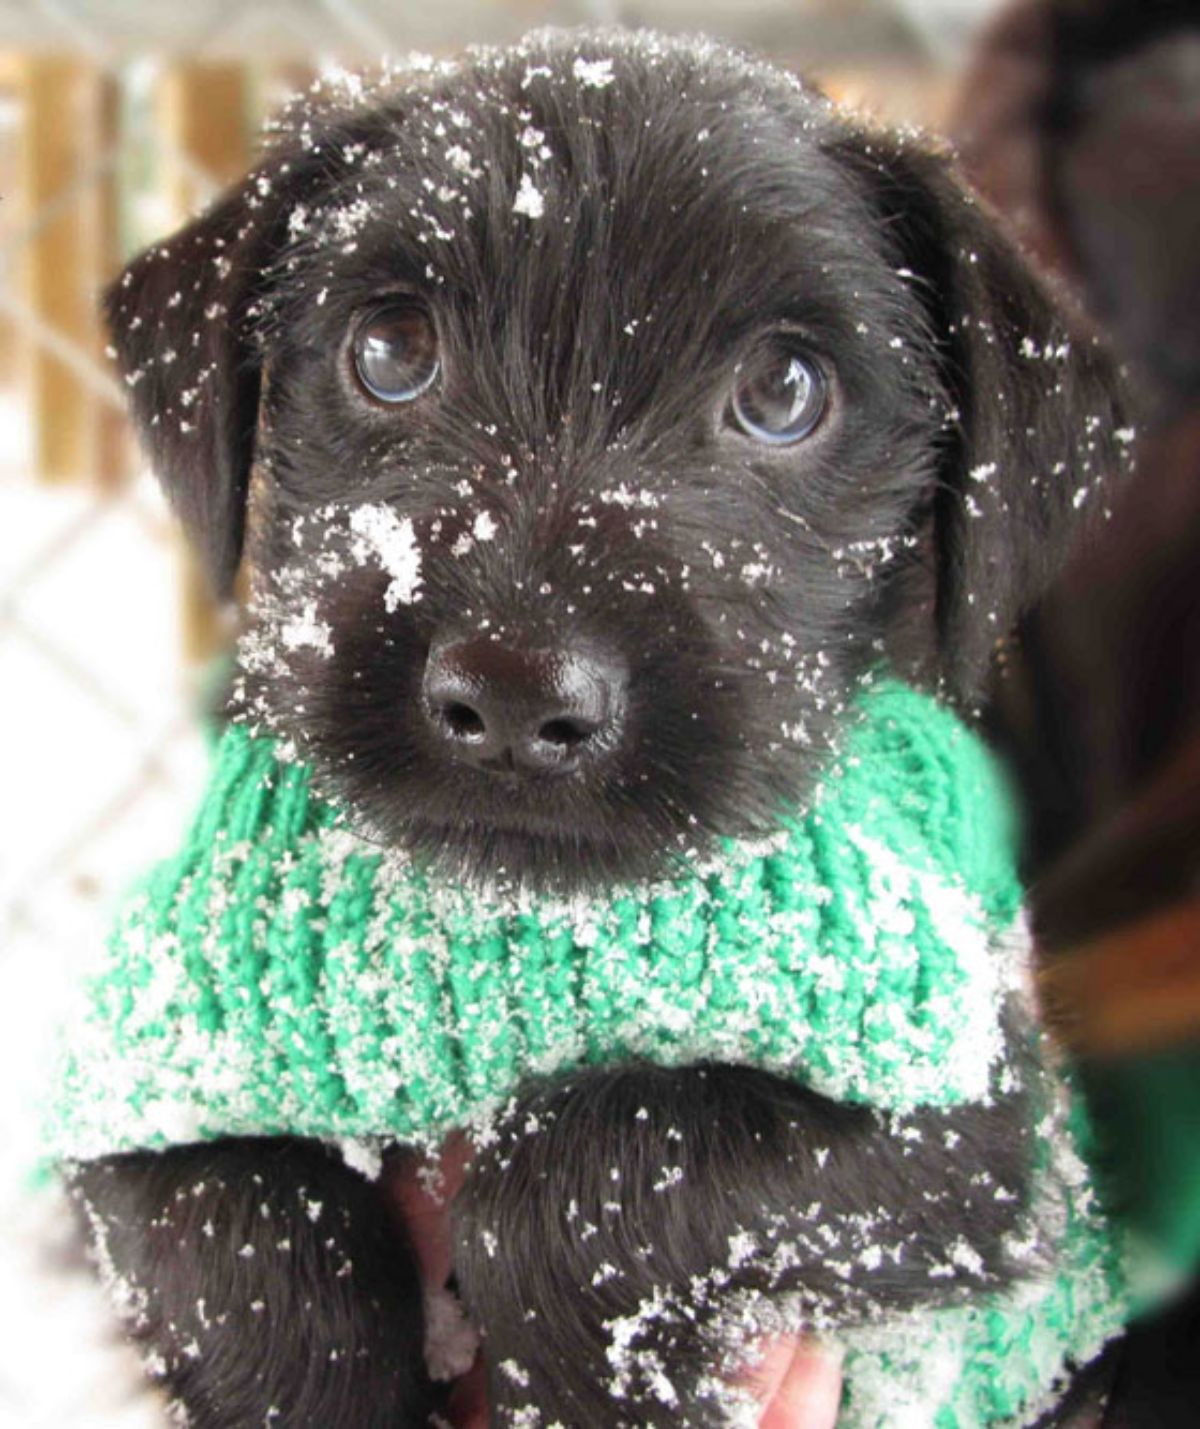 black puppy wearing a green sweater and covered in snow and being held by someone